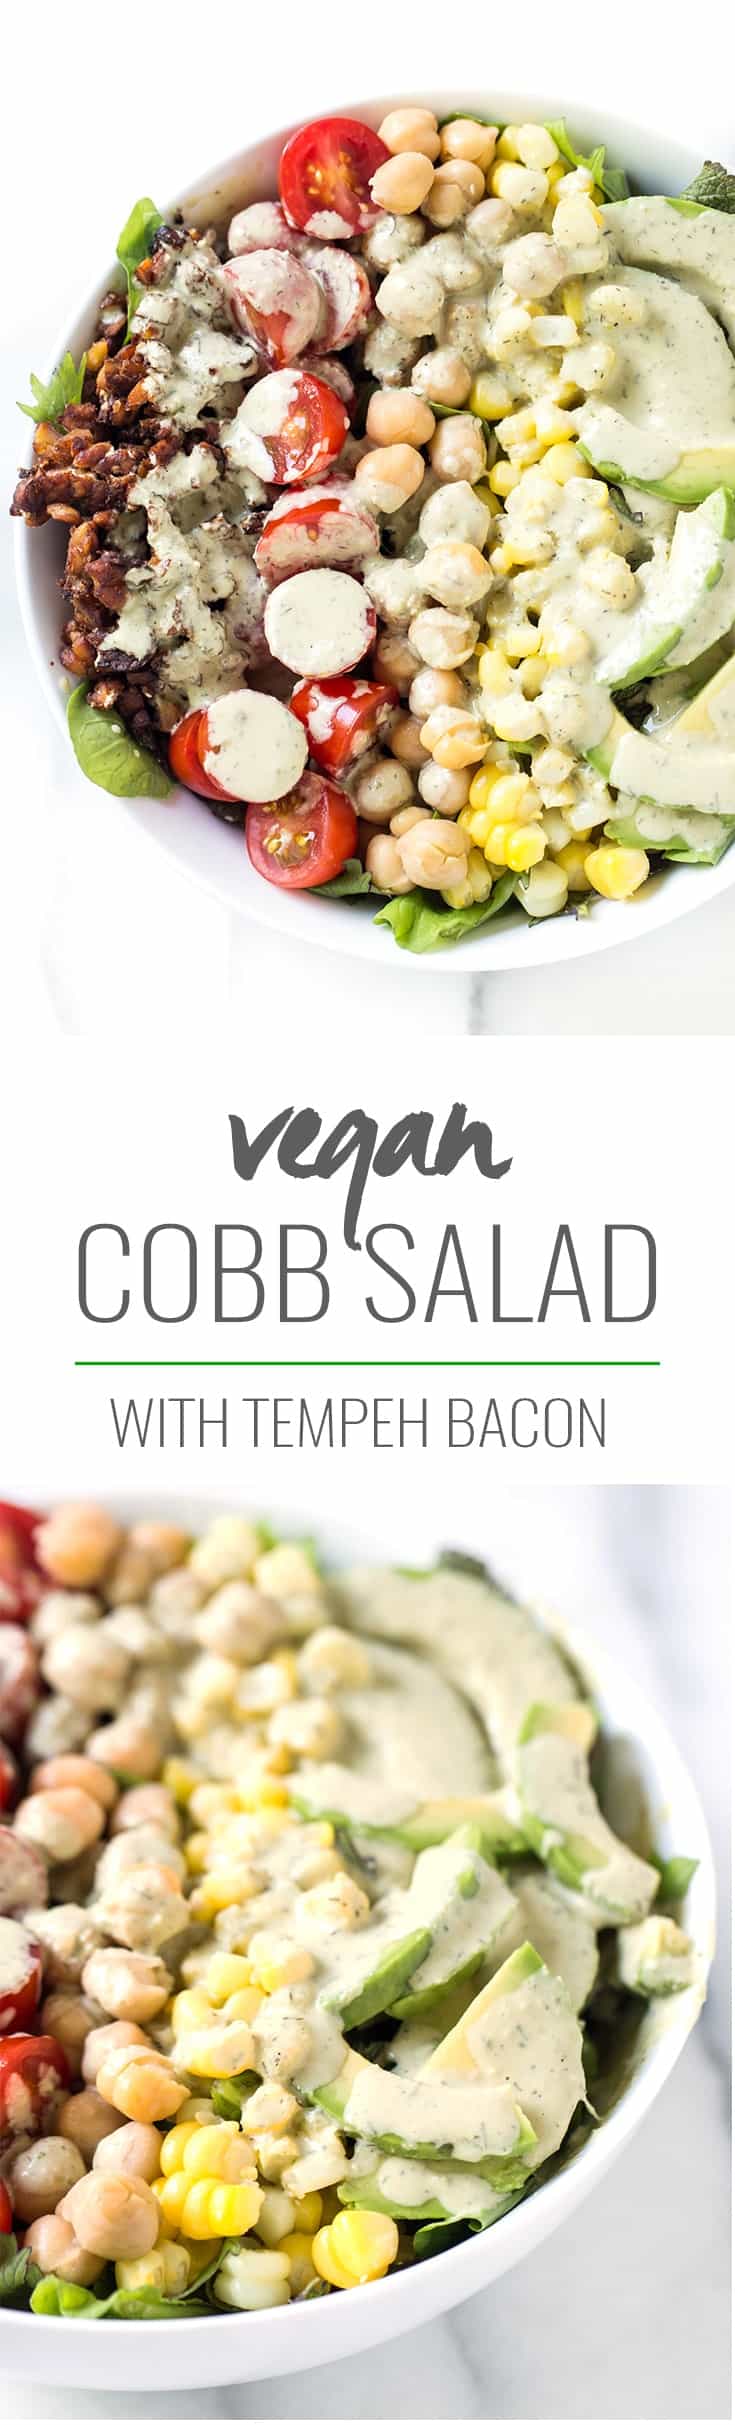 A simple Vegan Cobb Salad that tastes like the "real" thing but doesn't use any meat or dairy! Protein-packed and delicious!